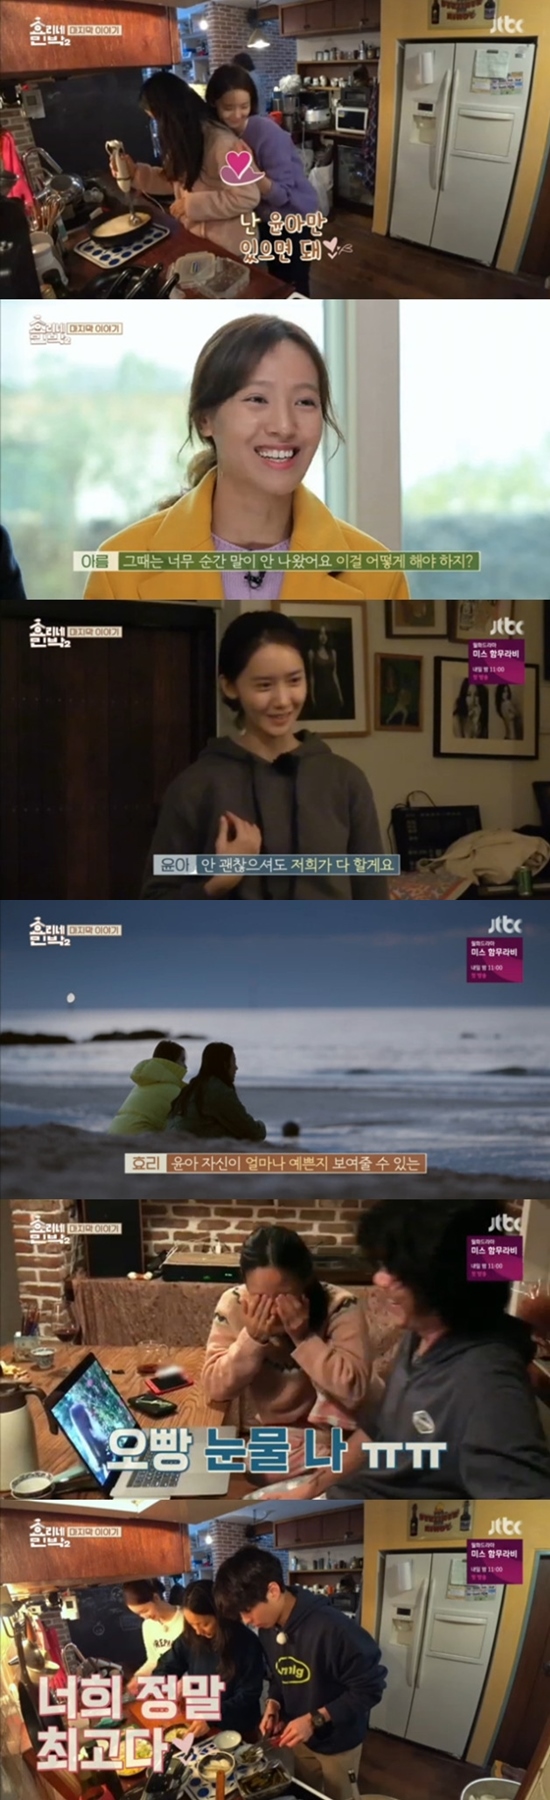 JTBC Hyoriene Guest House 2 broadcasted on the 20th was decorated with special broadcasts including the guests Guest house review and back story.All the guests left on the day and only Lee Hyori Lee Sang-soon was left at Guest House again; the two, who had decided to take a nap, lay in bed for a long time.Lee Hyori said, I can not see people in the house, I can not see it.Lee Sang-soon also helped the sword is sorting it out there.Nevertheless, when Lee Hyori continued to call the names of the guests, Lee Sang-soon eventually laughed, saying, Get your head up.The Guest House review of the guests who went through the Guest House continued, and the satisfaction of the guests reached the highest level in the open-air bath, which was the first in winter sales.I liked the old-fashioned bath, and my head was so clear, said the rich man. I think I healed a lot while doing the old-fashioned bath.Friends of the judo department who were in isolation due to heavy snow expressed their gratitude to Lee Sang-soon, who ran for a month for them.The prospective couple are also impressed by Lee Hyori and Lee Sang-soon, who have taken out their own dresses and tuxedos for wedding pictures.An undisclosed video of Im Yoon-ah was also released the day before Guest Houses first day of work, showing the paltryness of buying a discounted waffle machine.Moreover, Im Yoon-ah was an all-around employee who did not clean the cleaning surface and cook the cooking surface.I left Lee Hyori and the guests who were not well, and I cleaned the lining and the blocked toilet.To convey his gratitude to Im Yoon-ah, Lee Hyori expressed his desire to make a music video about how beautiful Im Yoon-ah himself is.Preparing for a breakup with Im Yoon-ah.Lee Hyori filmed the video, Lee Sang-soon edited it and produced a music video for Im Yoon-ah only.The video showed Im Yoon-ah at Guest House during winter and spring sales.Lee Hyori, who was infinitely repeating the video of Im Yoon-ah, was tearful and blushed with tears.I could not miss the part-time Park Bo-gum talk.Park Bo-gum has been treated to Guest housegoers in a sincere and kind look, boasting Im Yoon-ah and deer chemi.Guest housegoers said, It seemed to see other races. I wanted to go to work early in the morning and take care of the rice cake soup and come to the guests.Lee Hyori also said to the breath of Im Yoon-ah and Park Bo-gum, The sword is good and Im Yoon-ah is not good, you are the best.